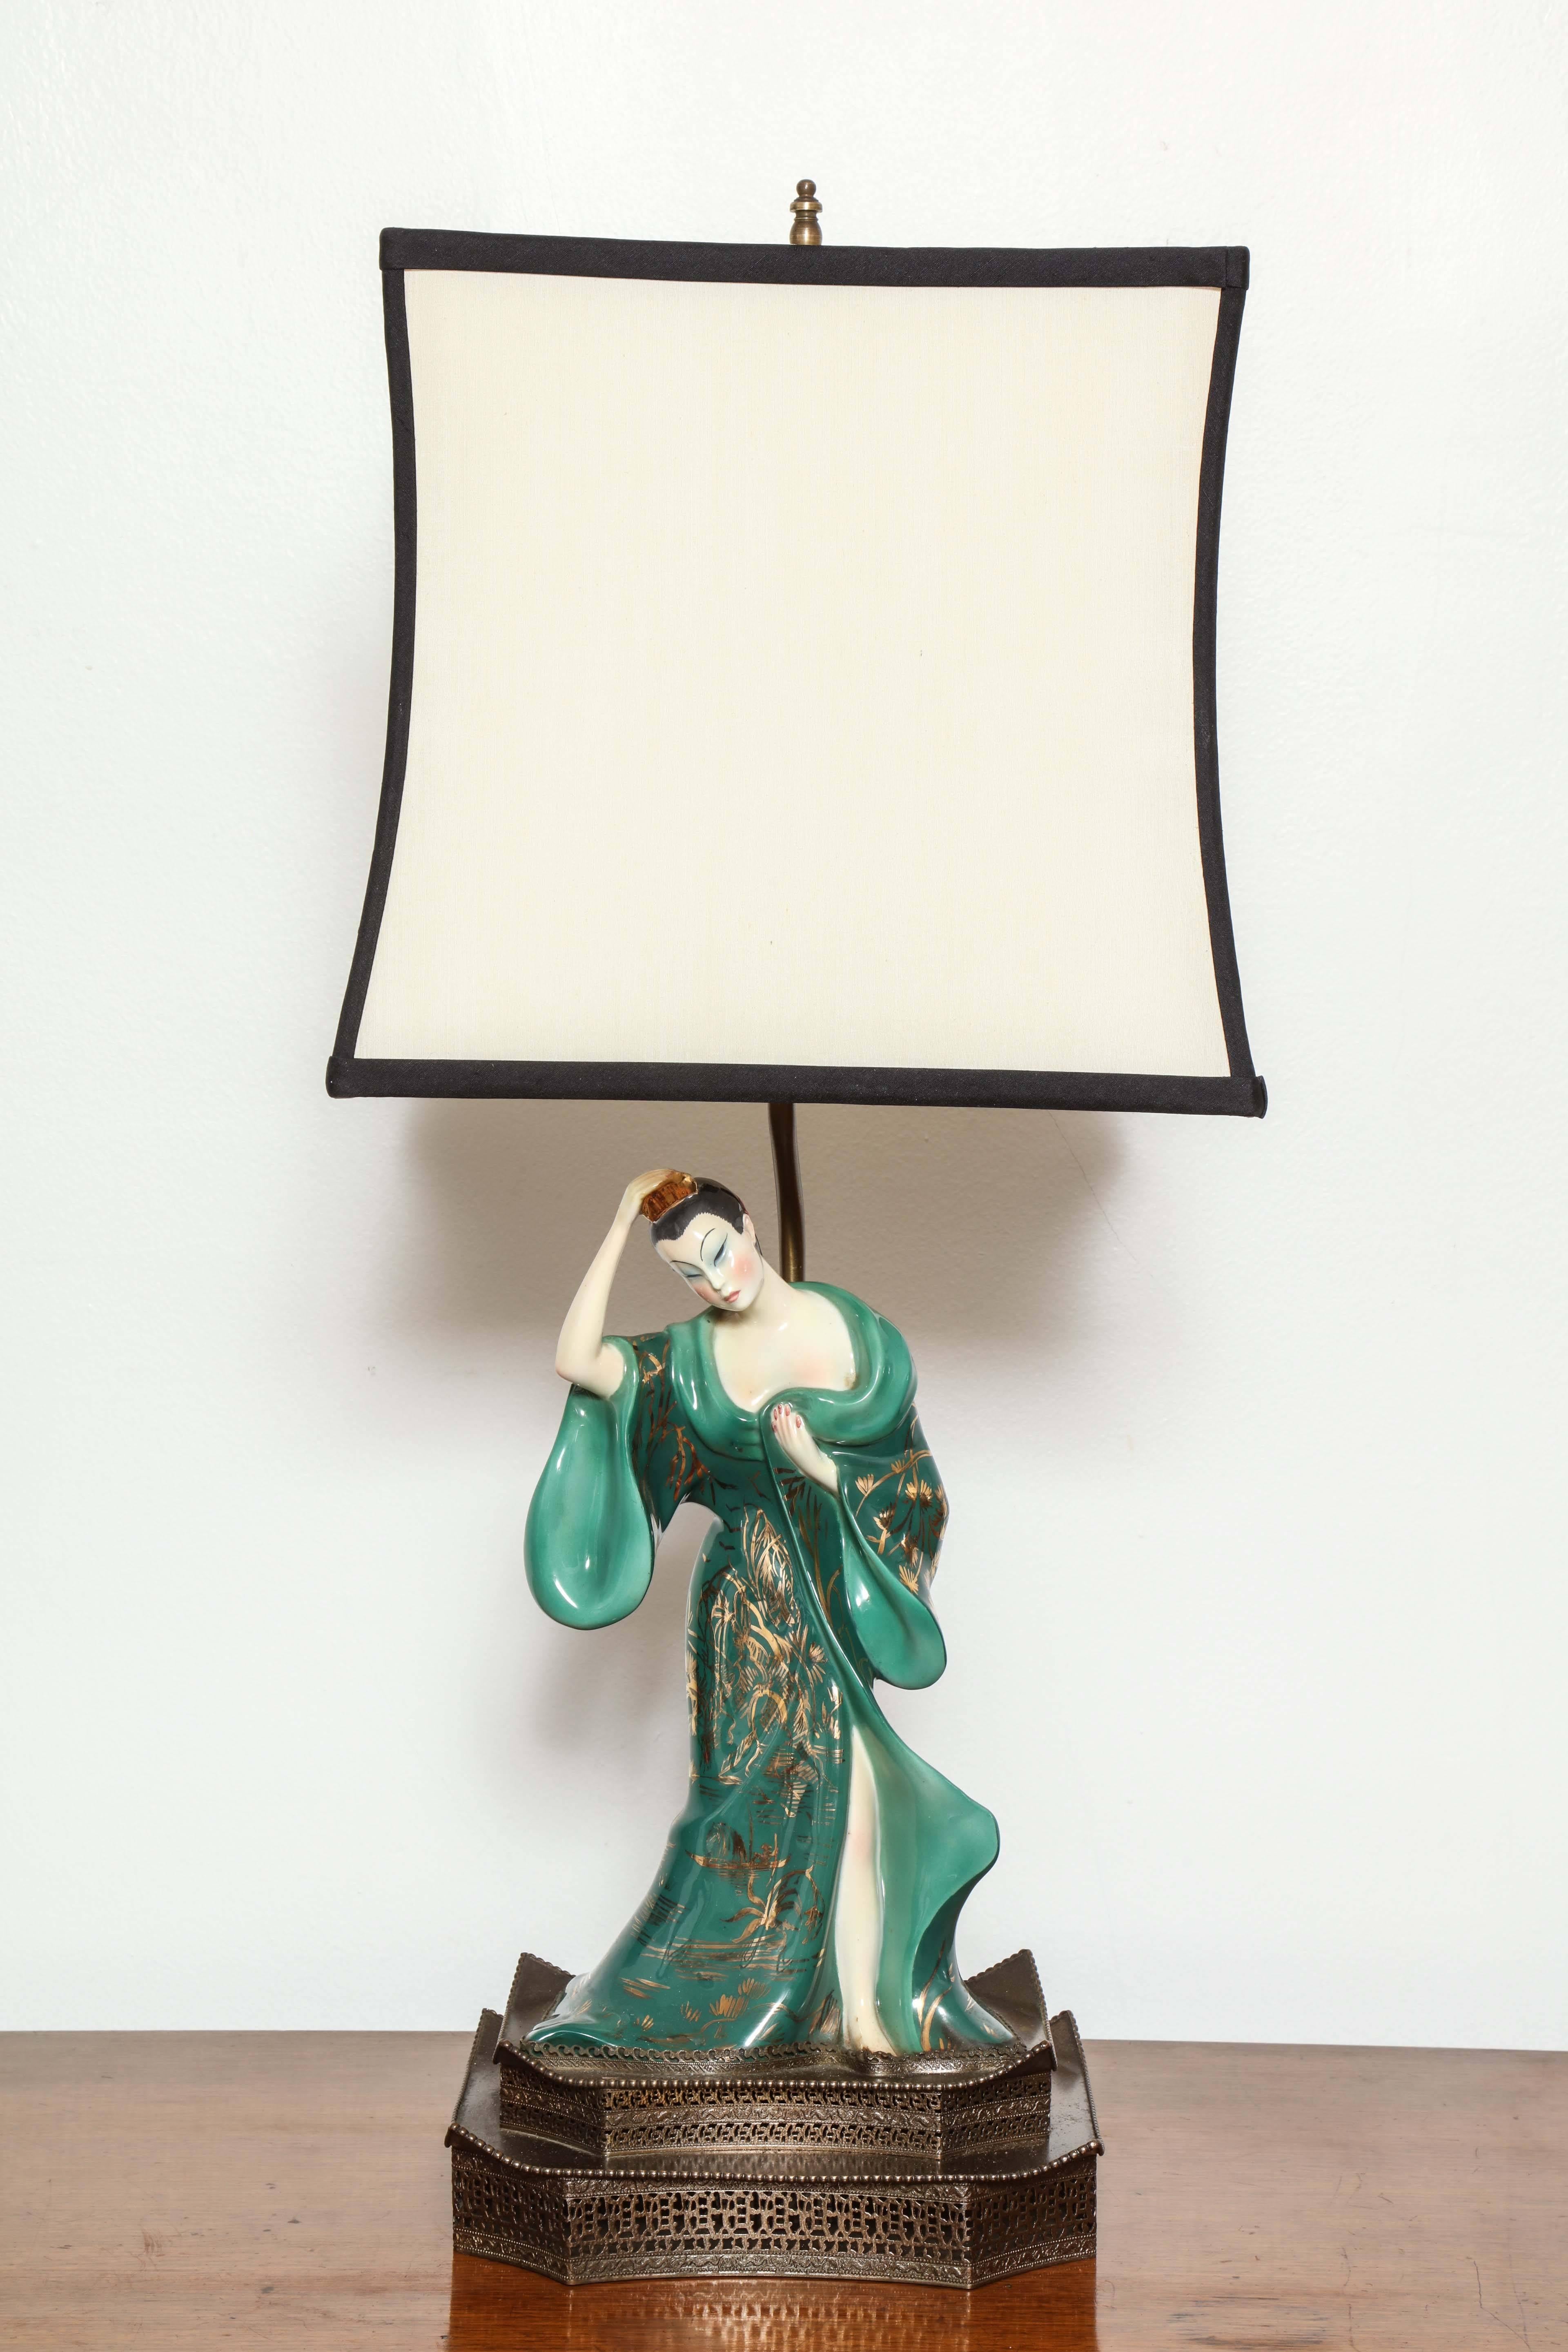 An unusual pair of Rosanna porcelain lamps mounted on antique bronze finish base. Beautiful hand-painted Italian figurines lend themselves to understated elegance. Sculptural in shape 17 inches tall base is 9 wide 6 3/4 deep shown with 10 x 10 x 10